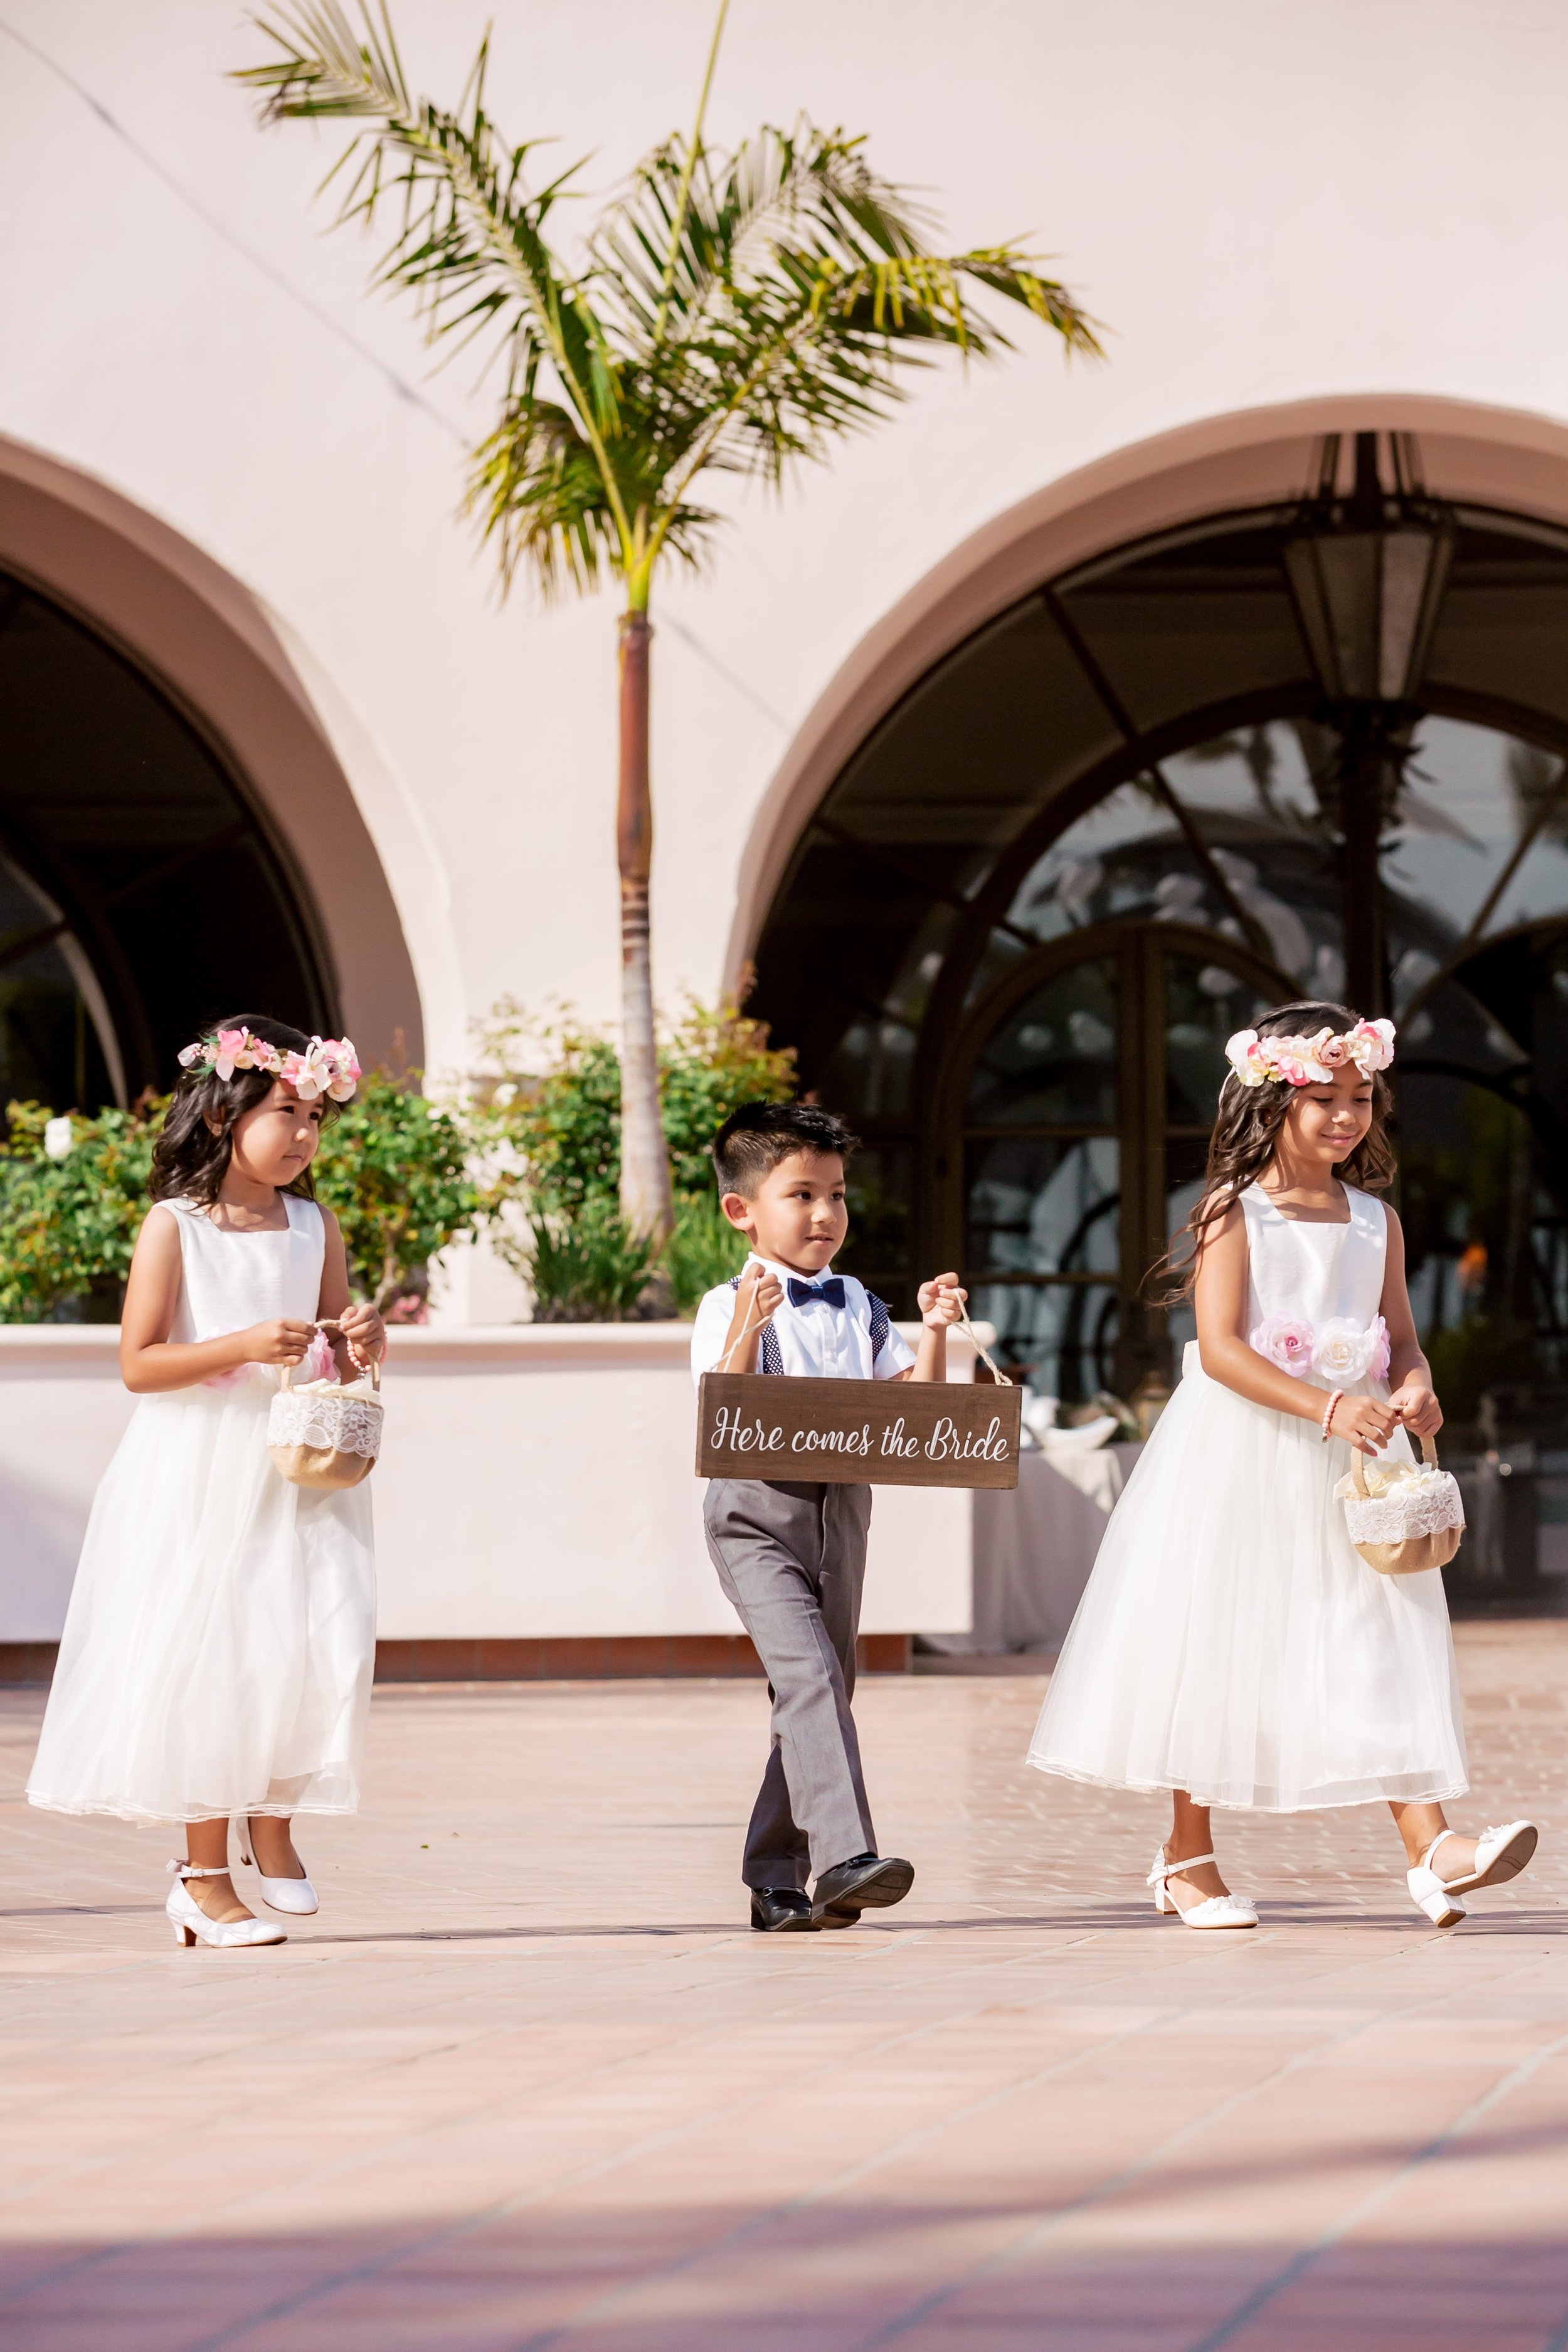 www.santabarbaraweddingstyle.com | Rewind Photography | Events by M and M | Hilton Santa Barbara | Flower Girl and Ring Bearer